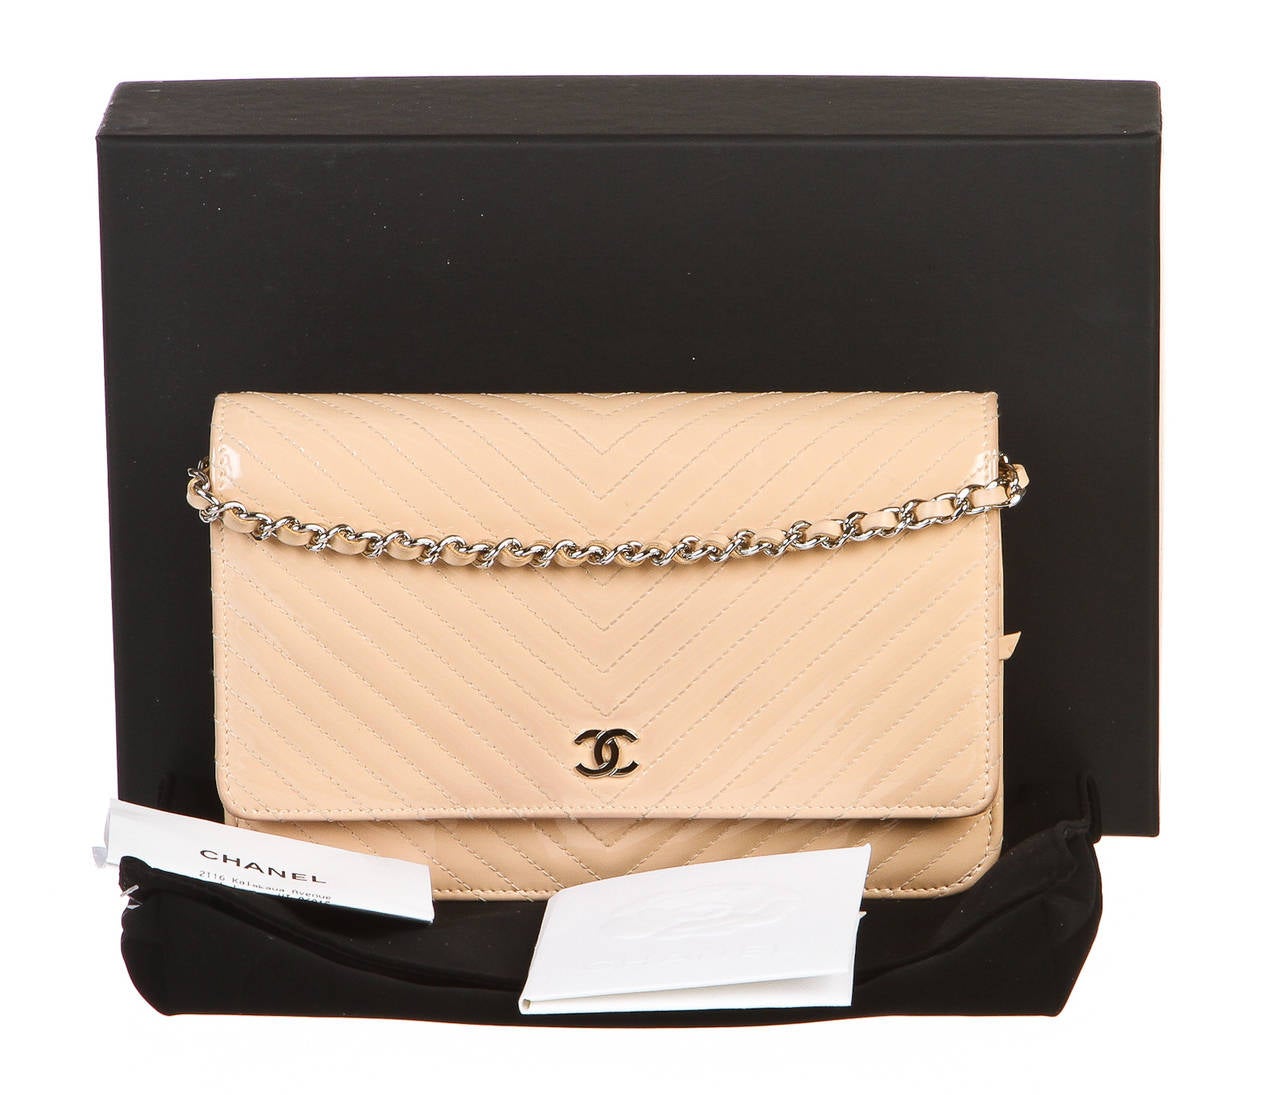 Show off your inner fashionista with a stunning Wallet on Chain crossbody from Chanel! It closes in a flap style as a CC rests in the front atop the snap closure. A chain link strap weaves a beige chevron patent leather that is also found in the